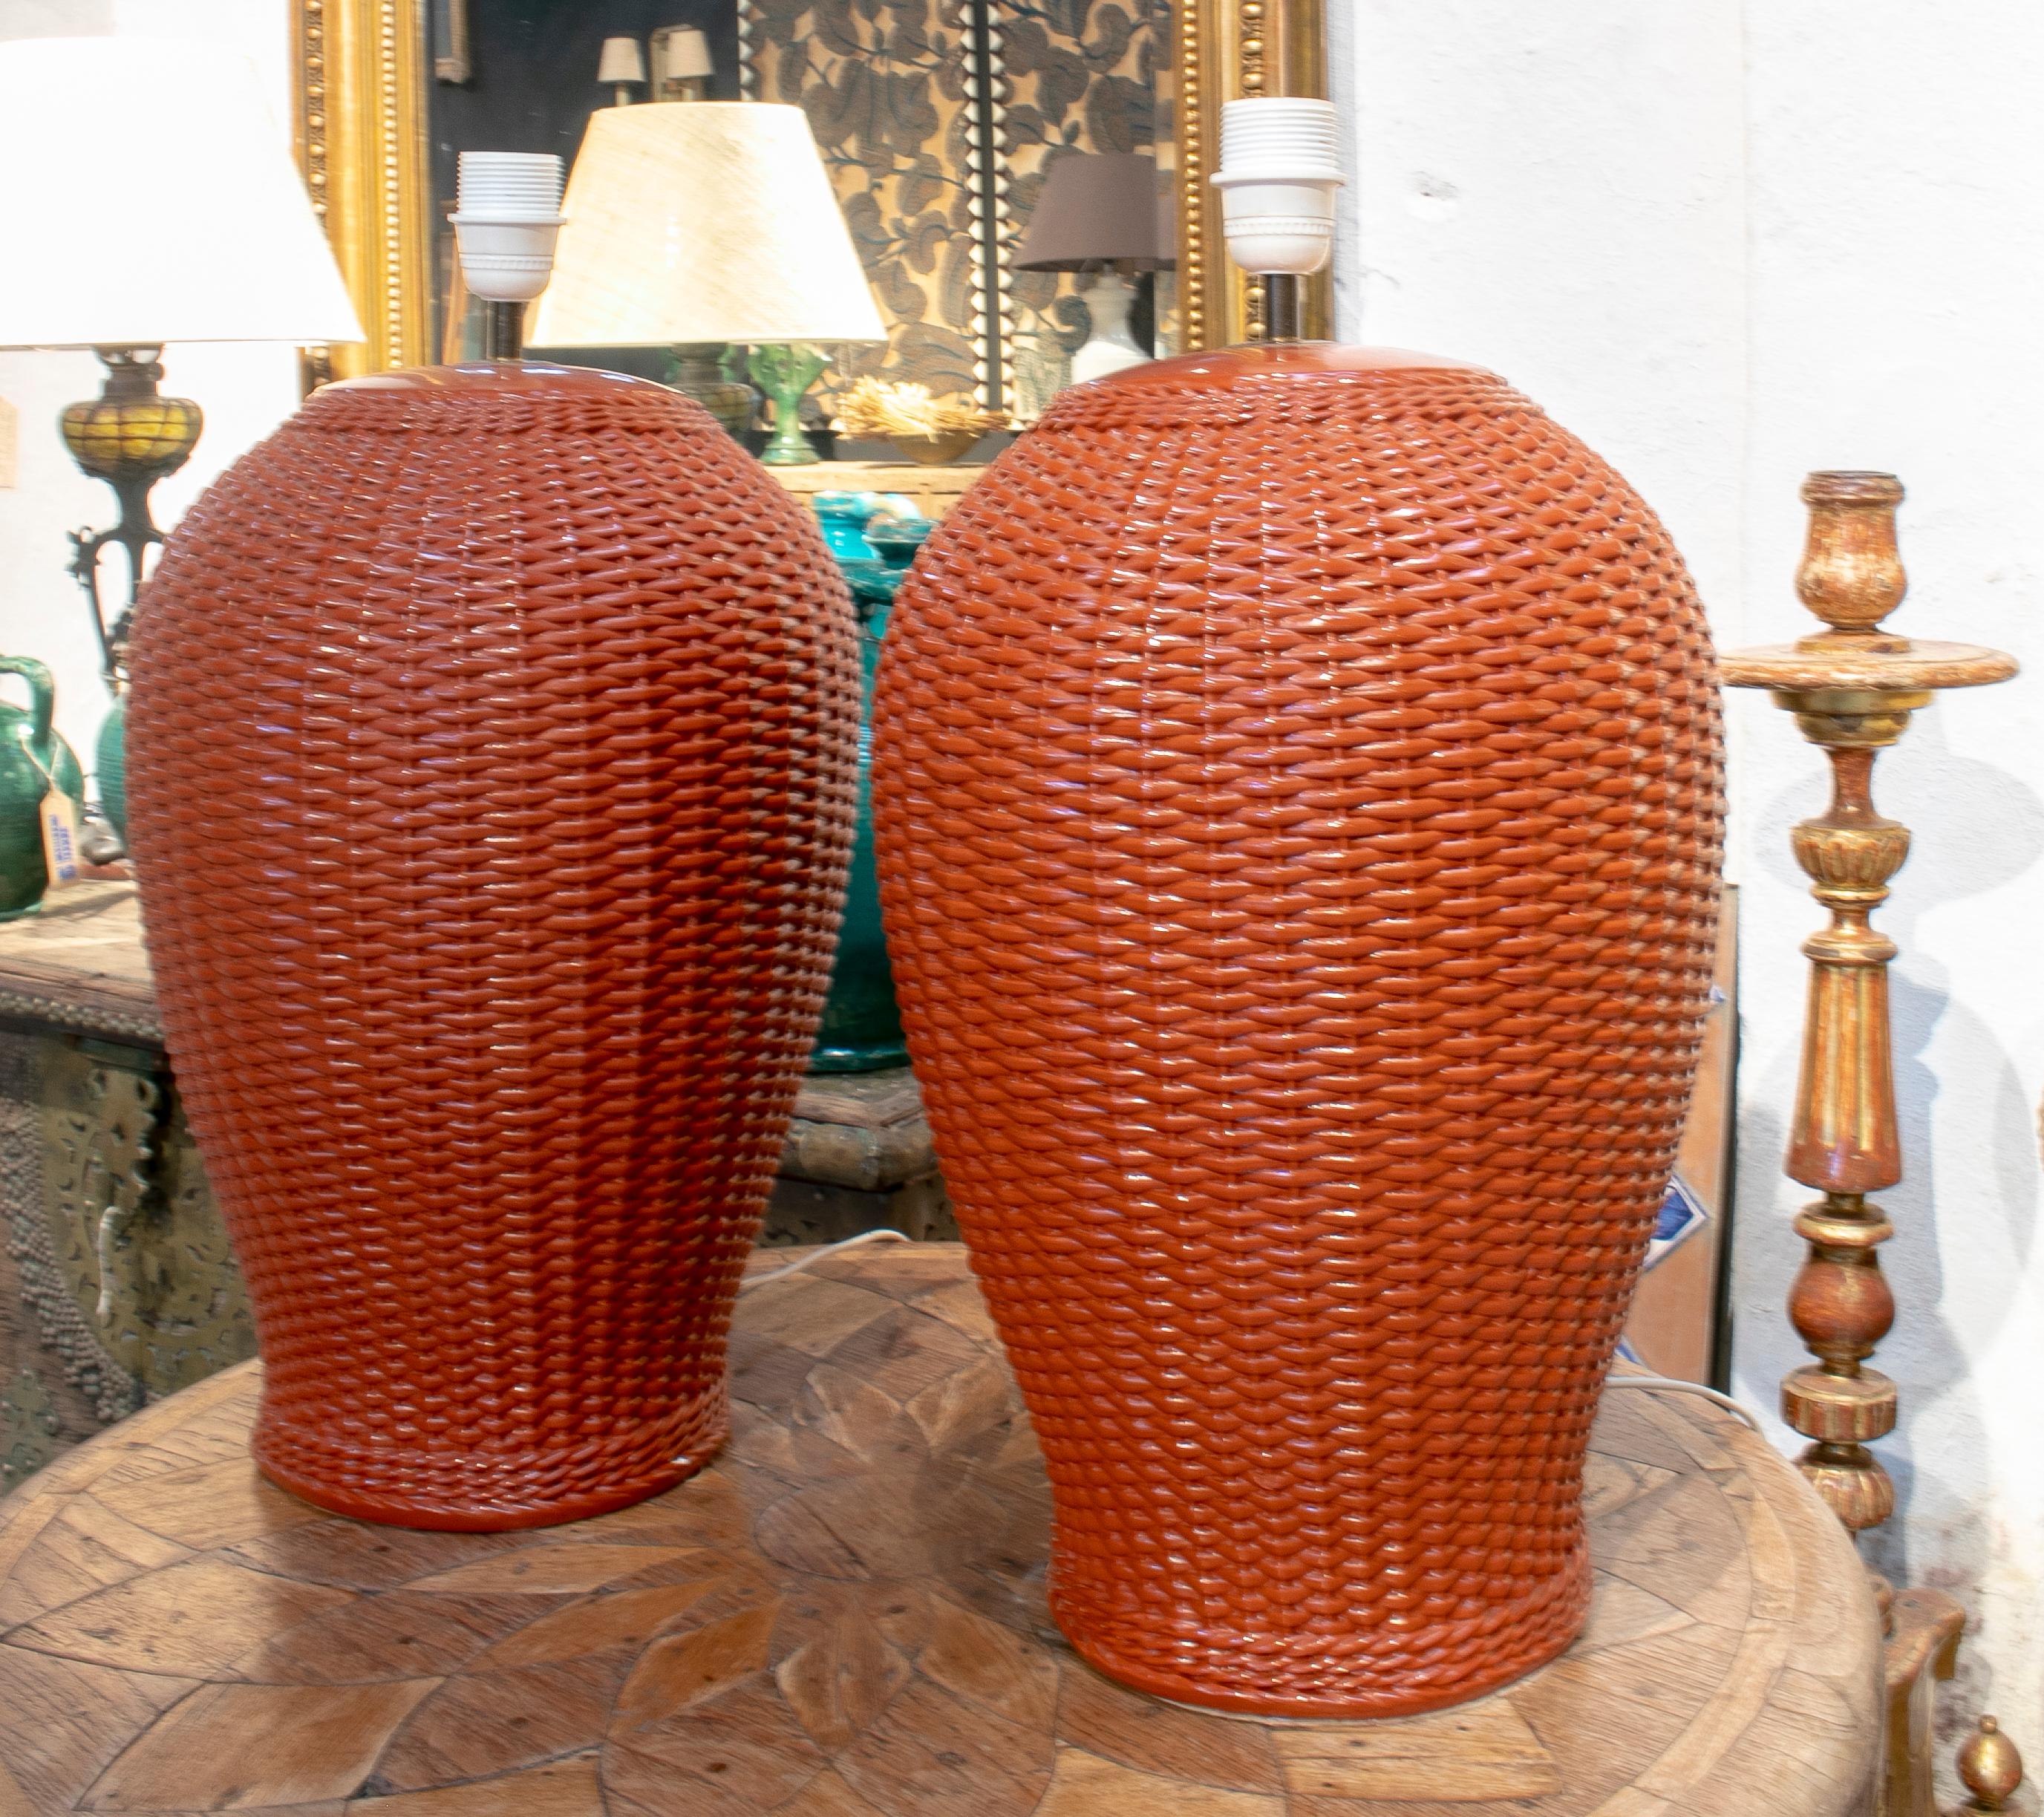 1970s pair of Spanish red ceramic table lamps imitating handwoven wicker.